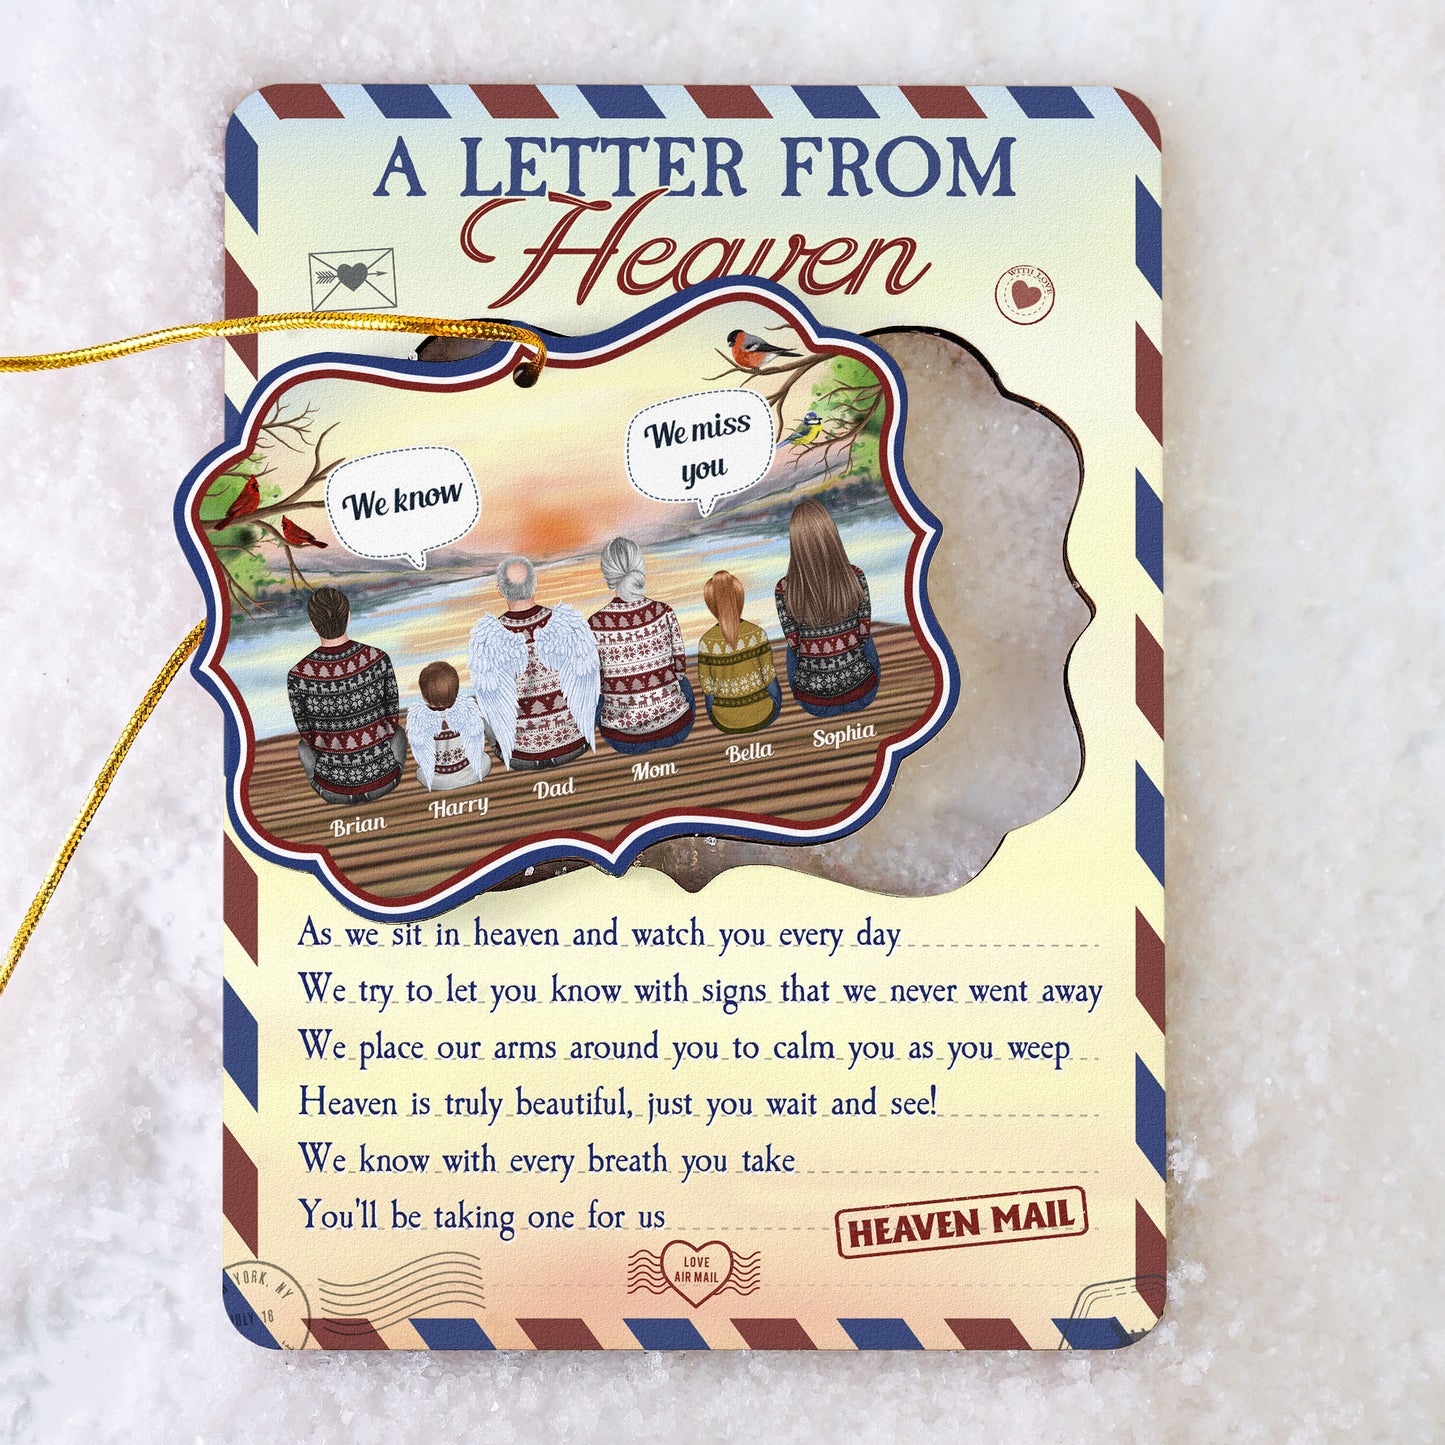 A Letter From Heaven With Kids - Personalized Wooden Card With Pop Out Ornament - Christmas, Loving, Memorial Gift For Family With Lost Ones, Parents, Grandparents, Children